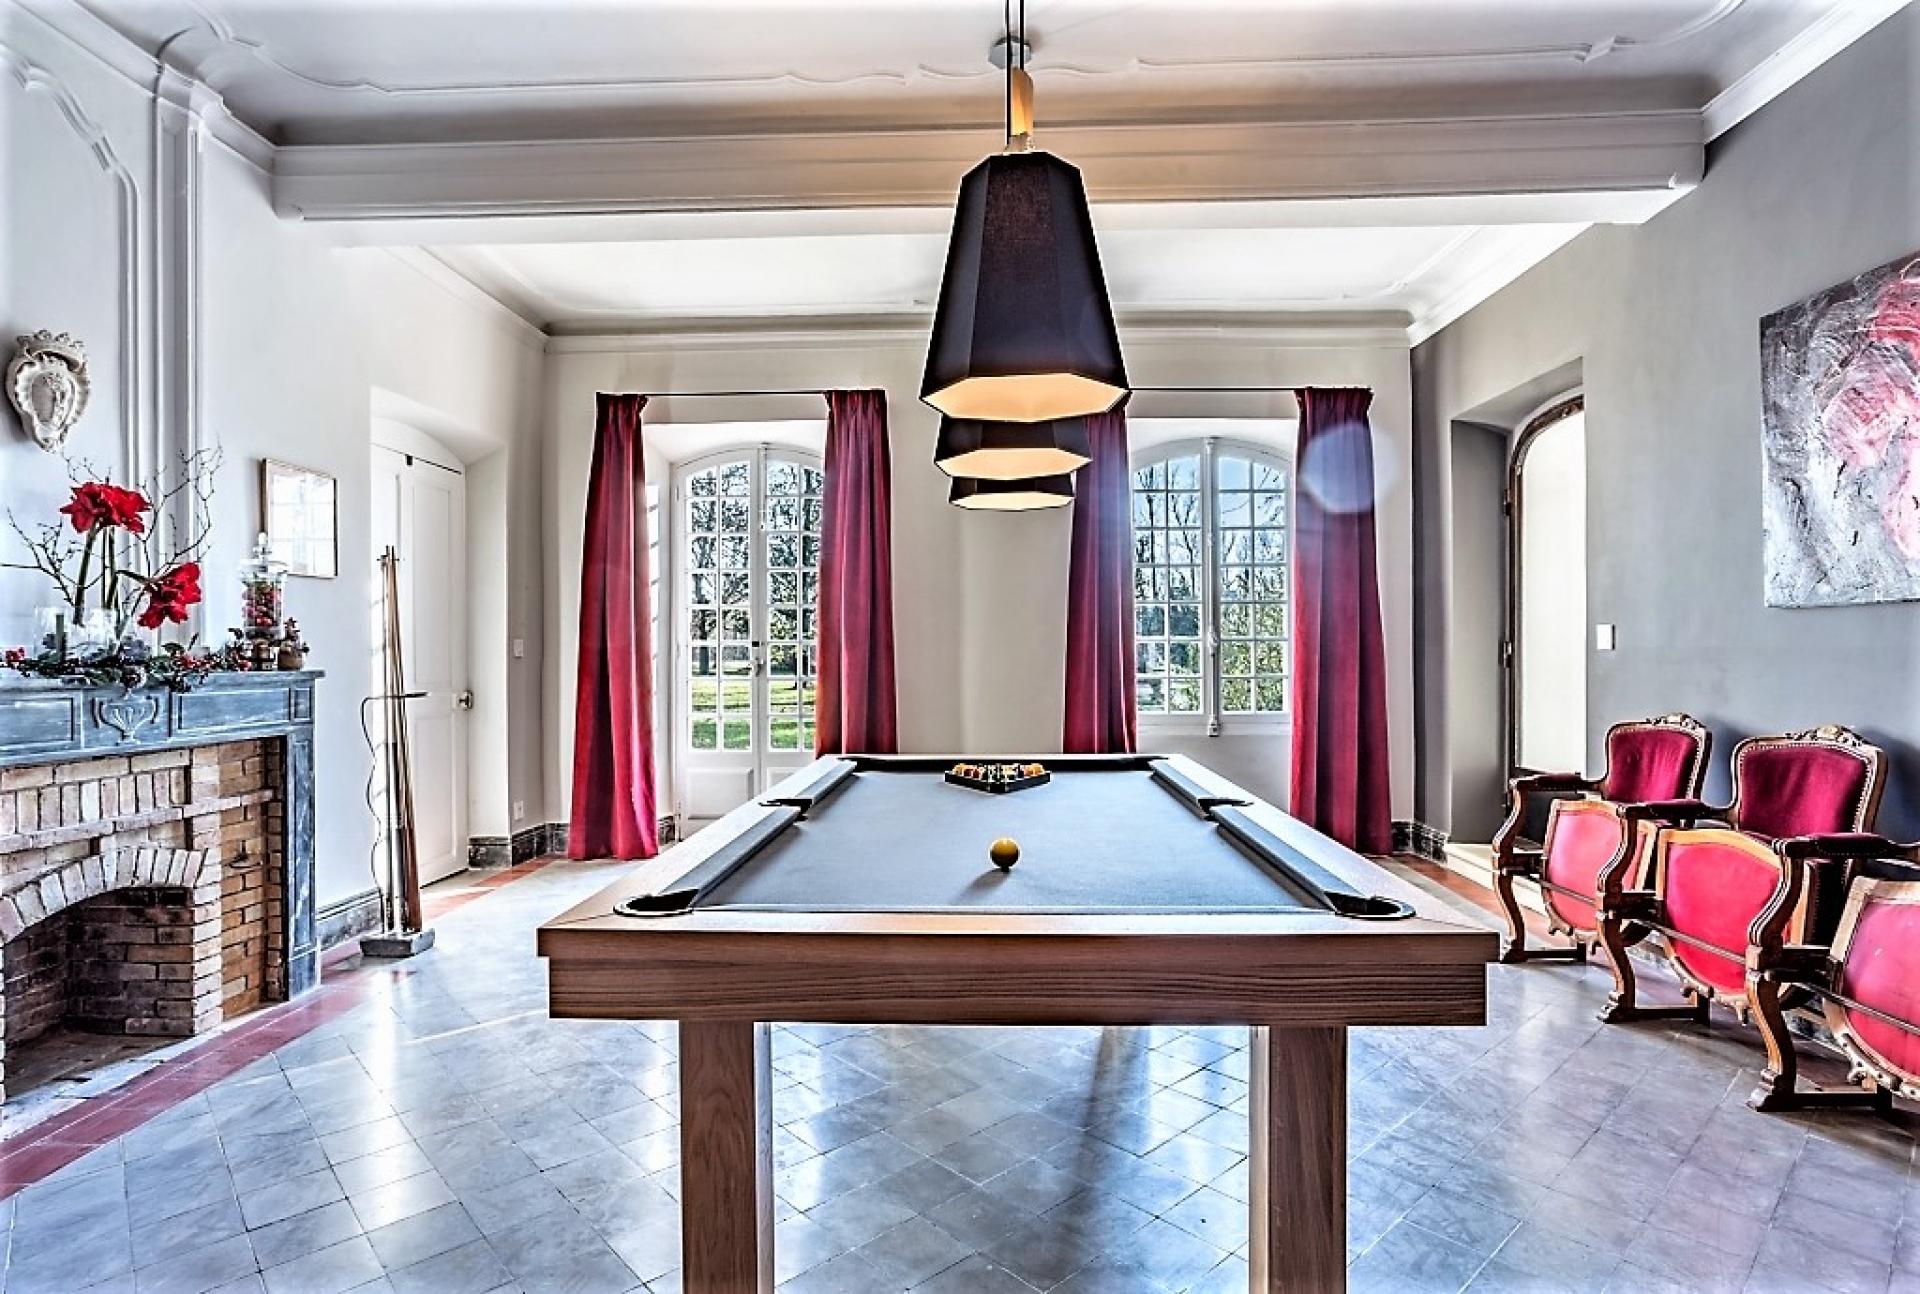 A GREAT ROOM TO PLAY A GAME OF POOL